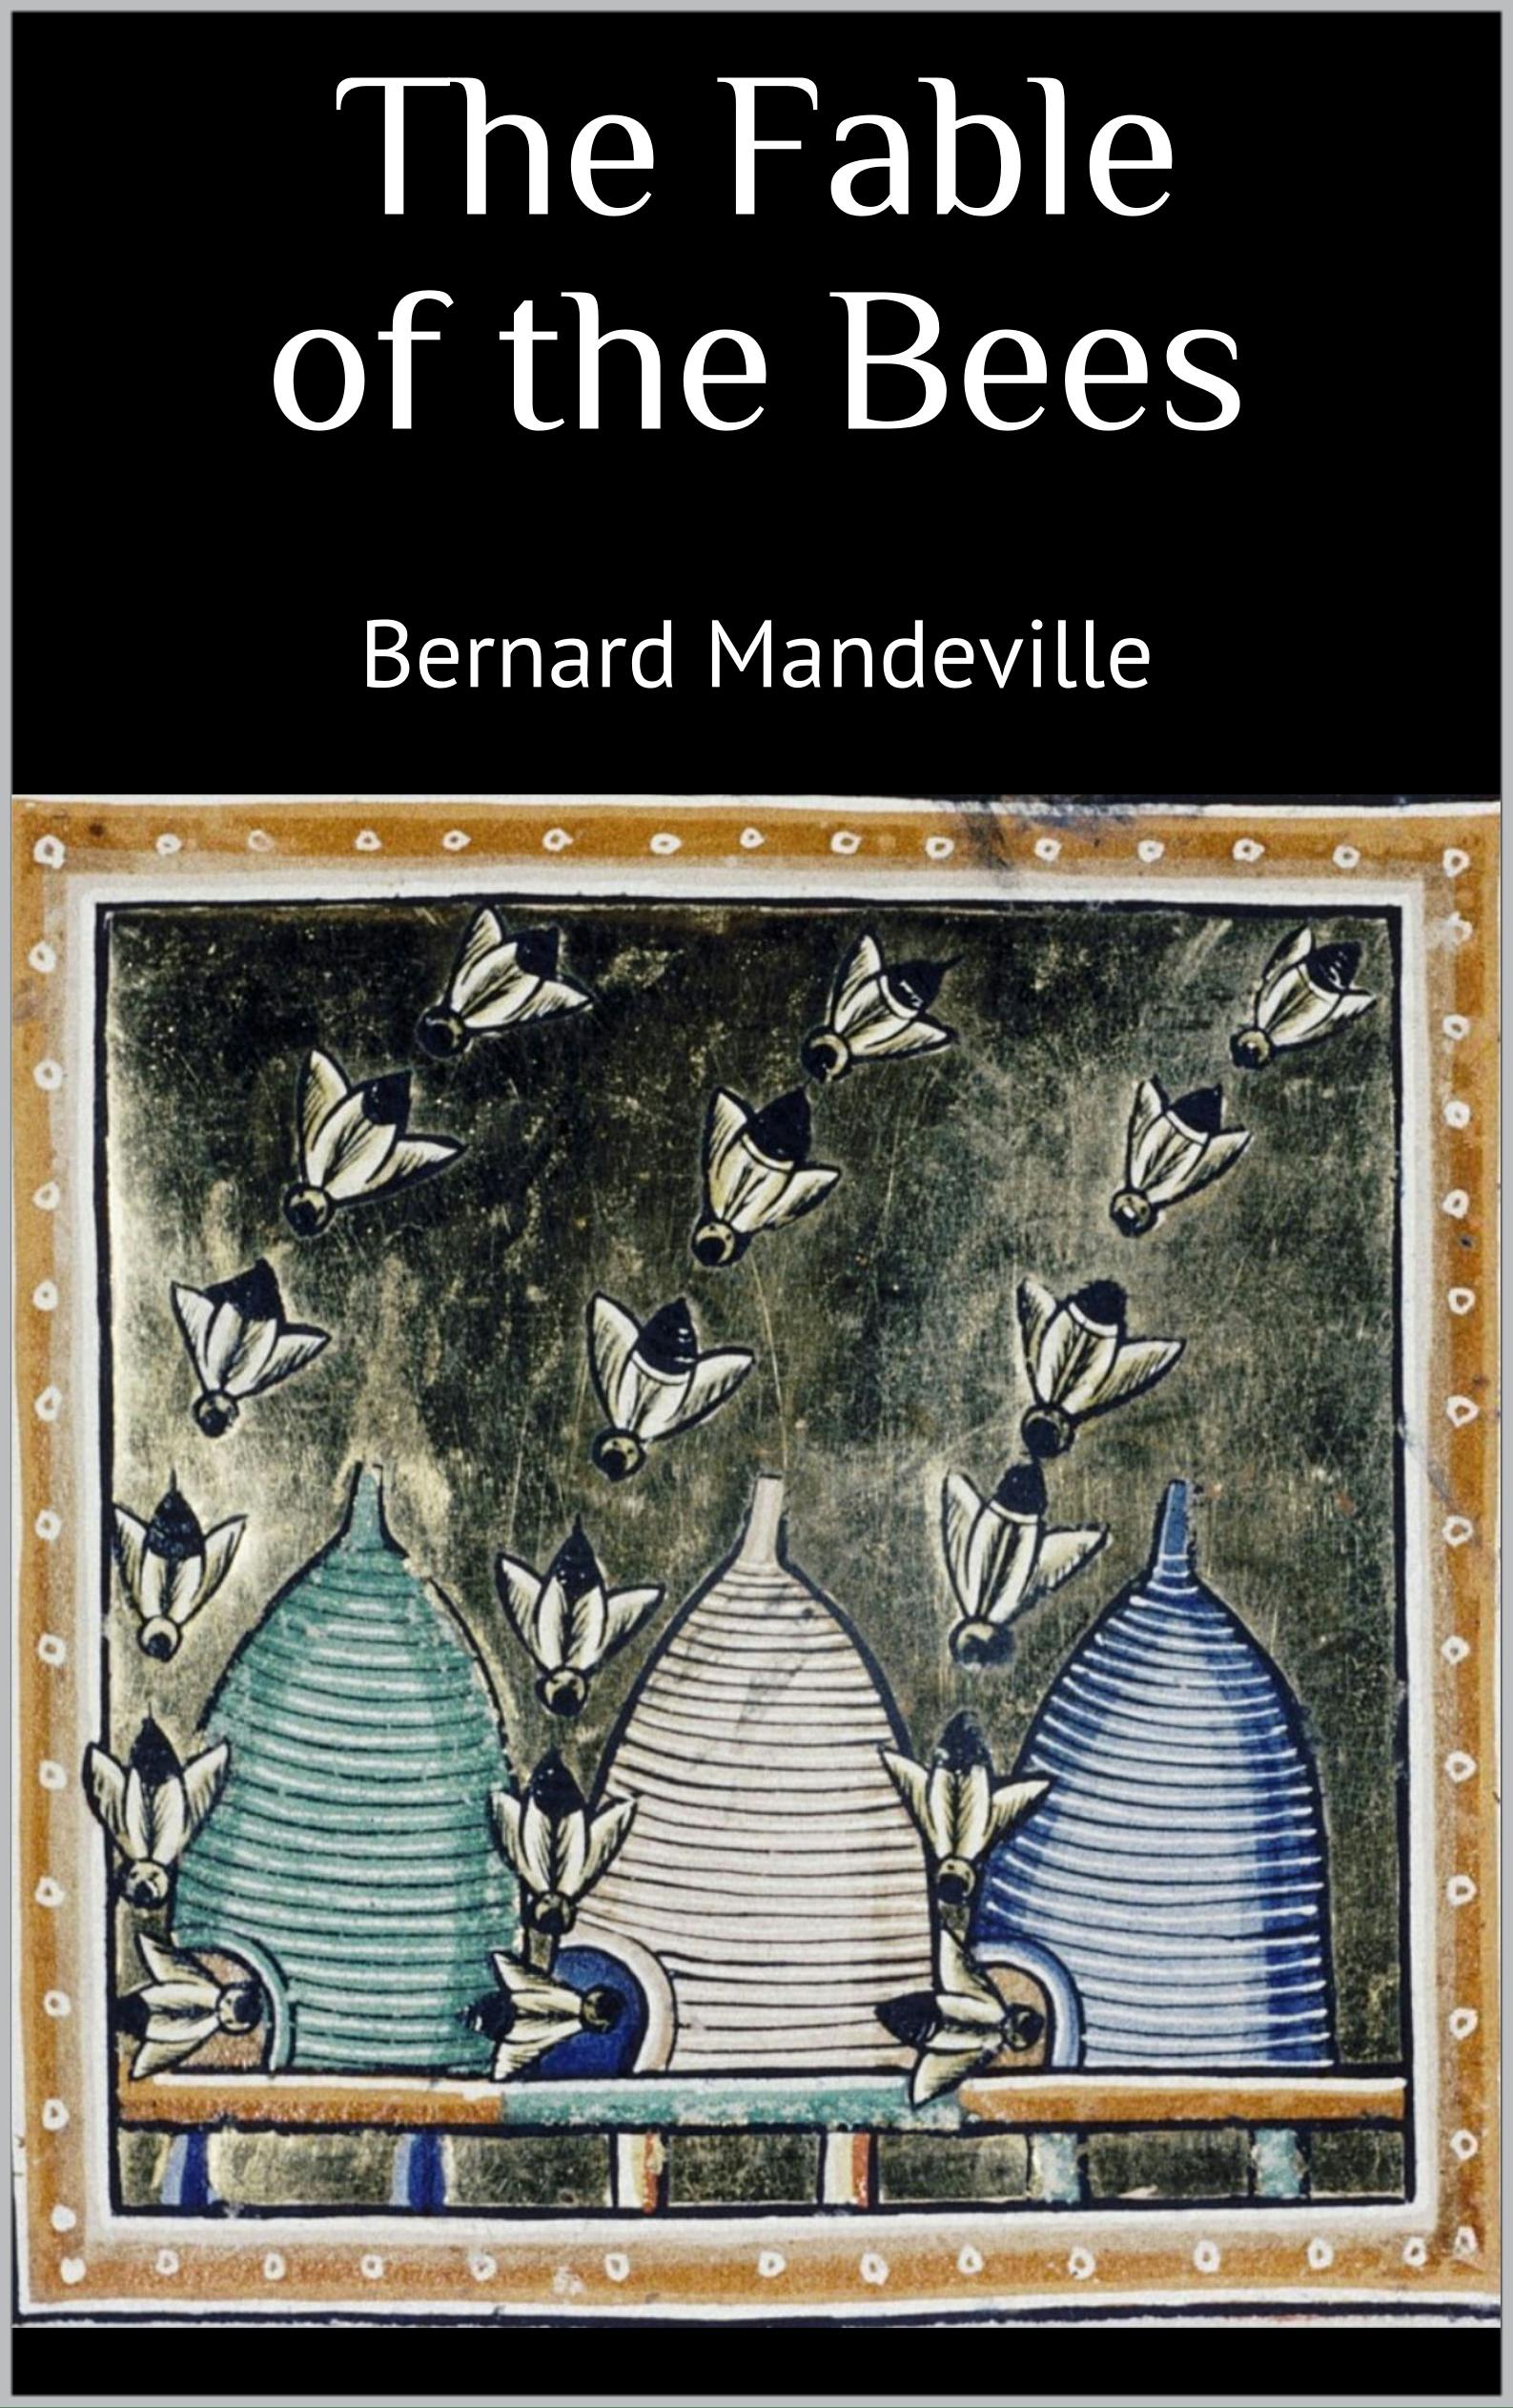 The Fable of the Bees - Bernard Mandeville